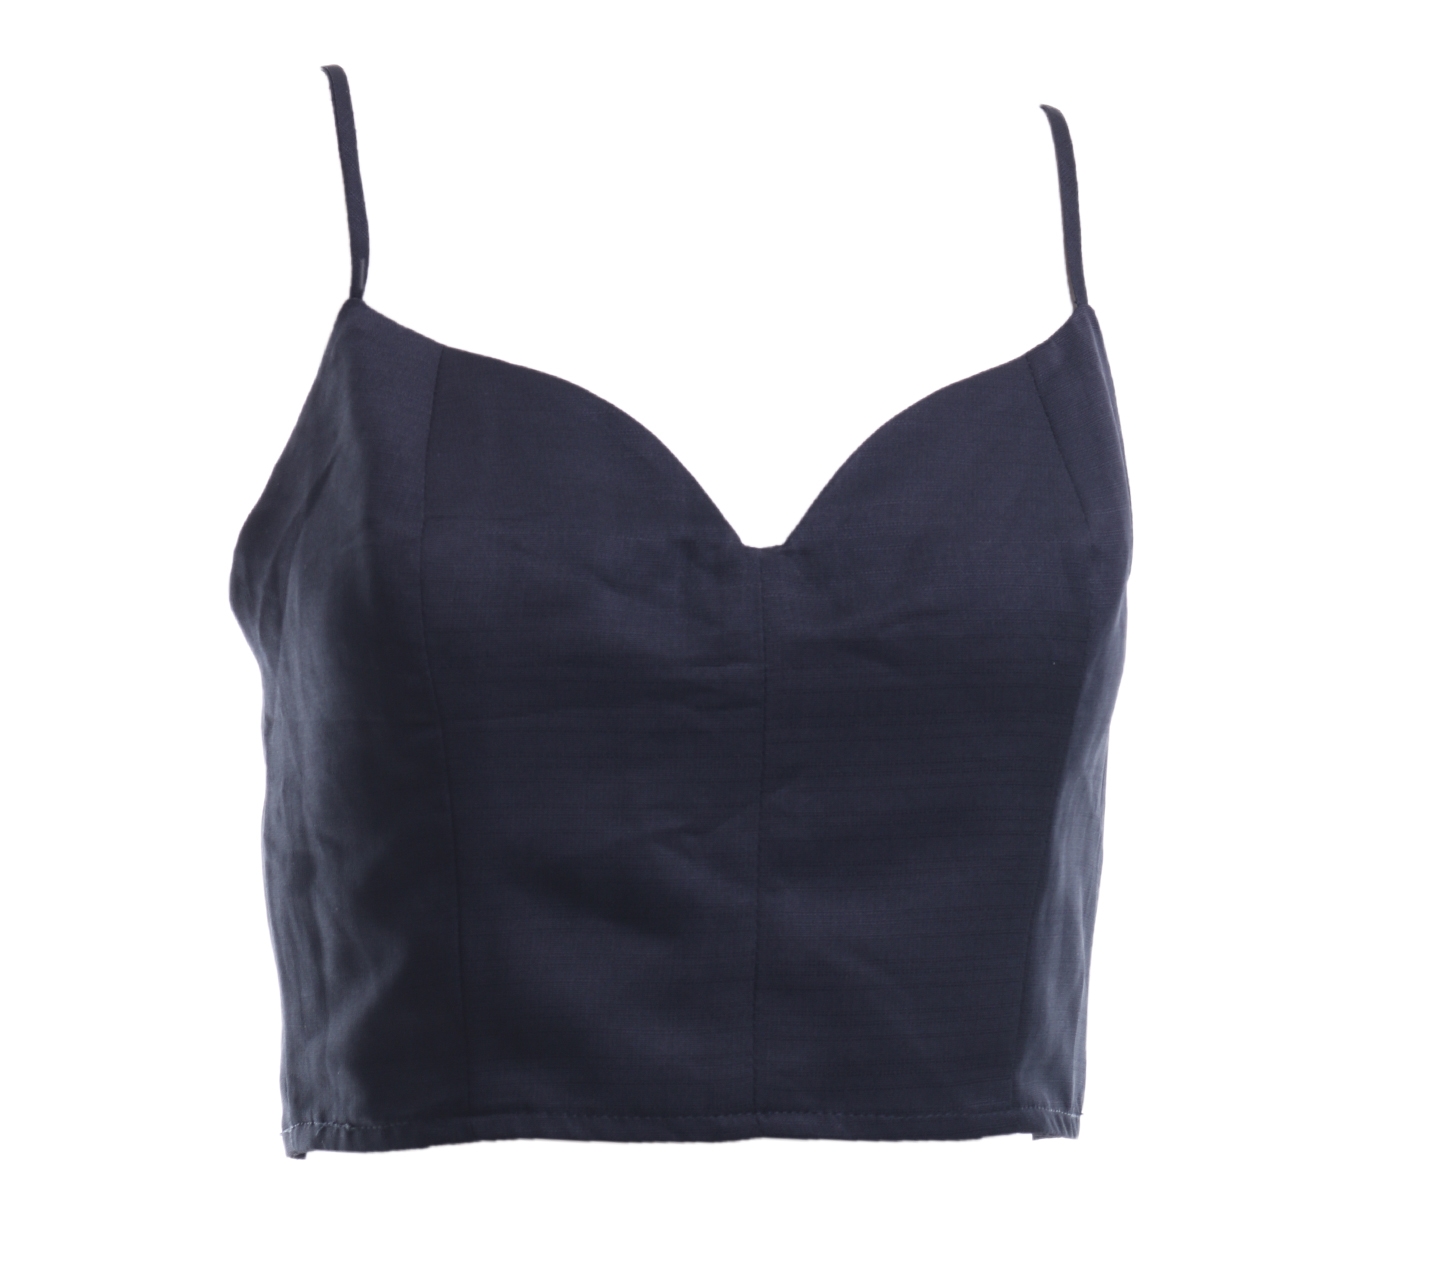 Shandy Aulia Collections Black Bralette Sleeveless